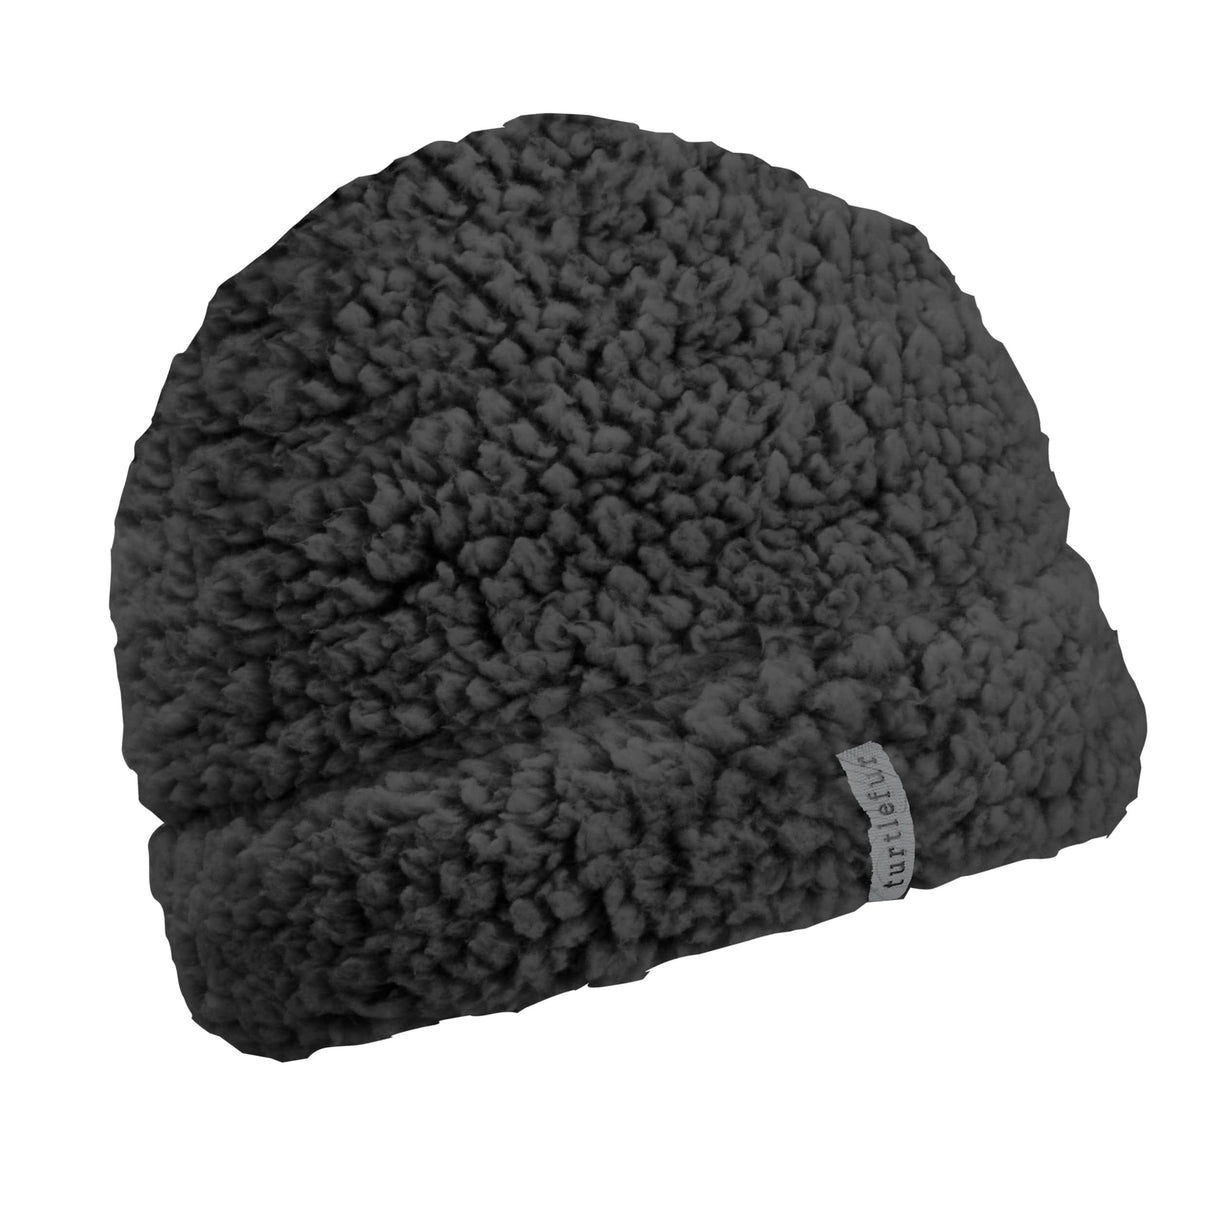 Turtle Fur Comfort Lush Beanie  -  One Size Fits Most / Black